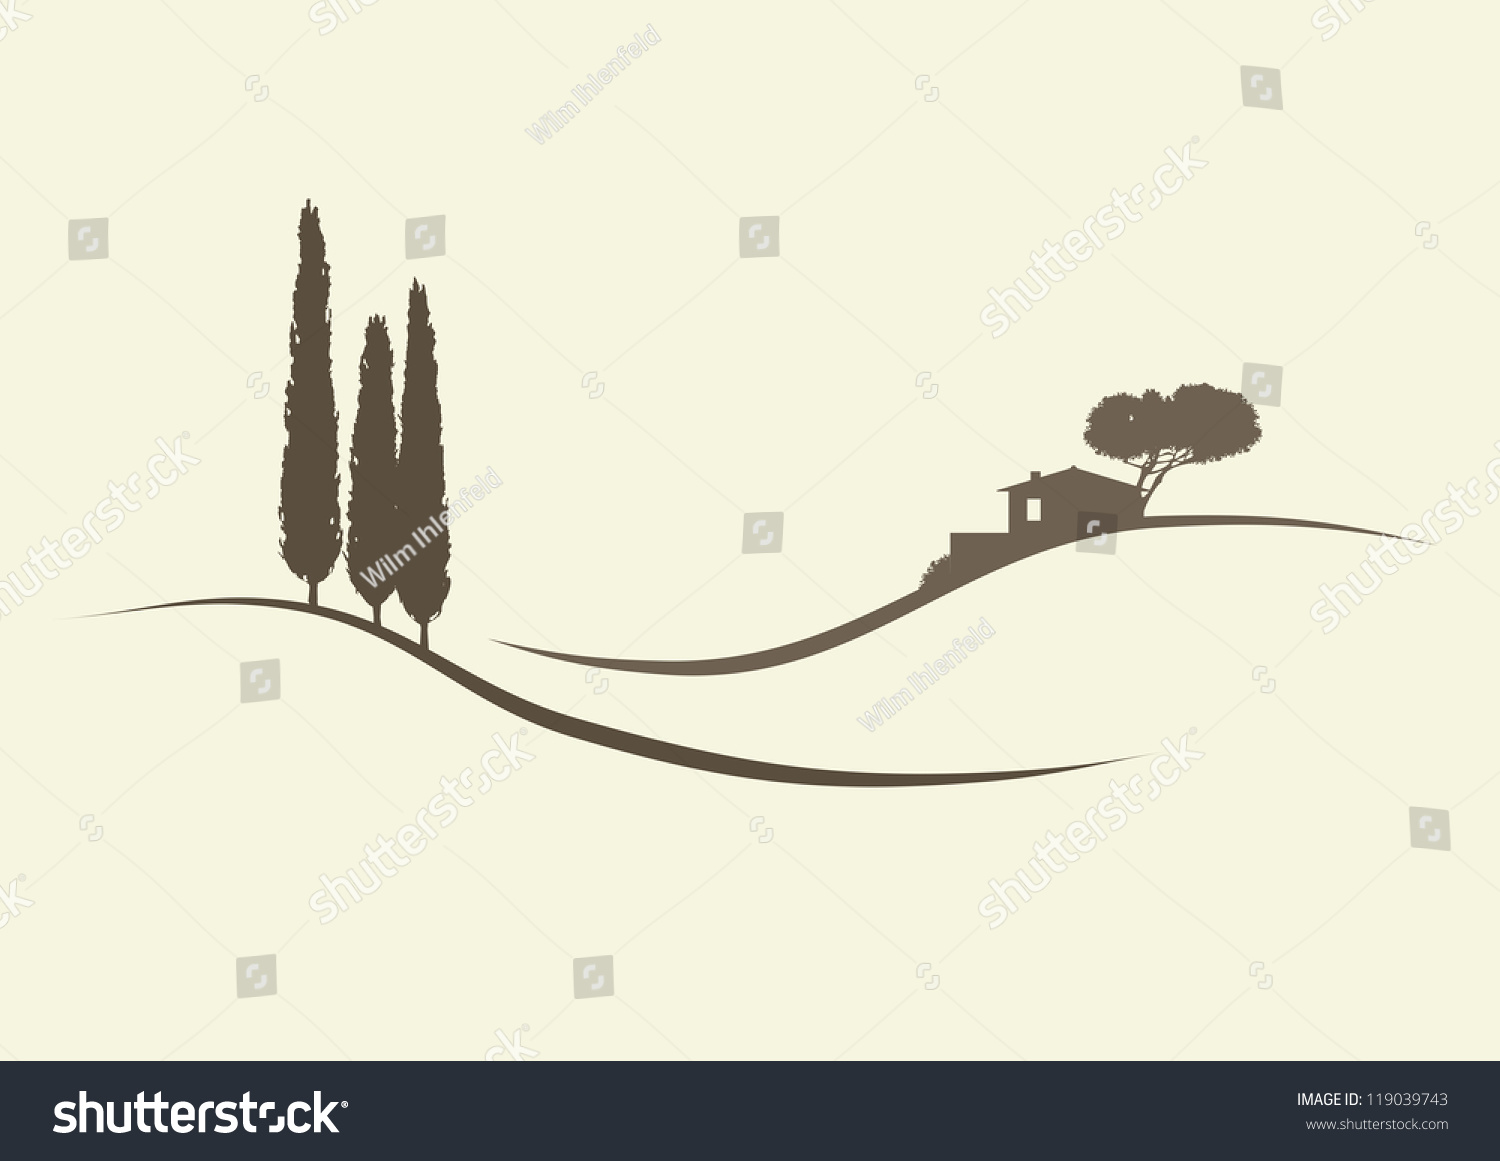 SVG of cypress trees and a finca in the typical tuscanian vector landscape svg